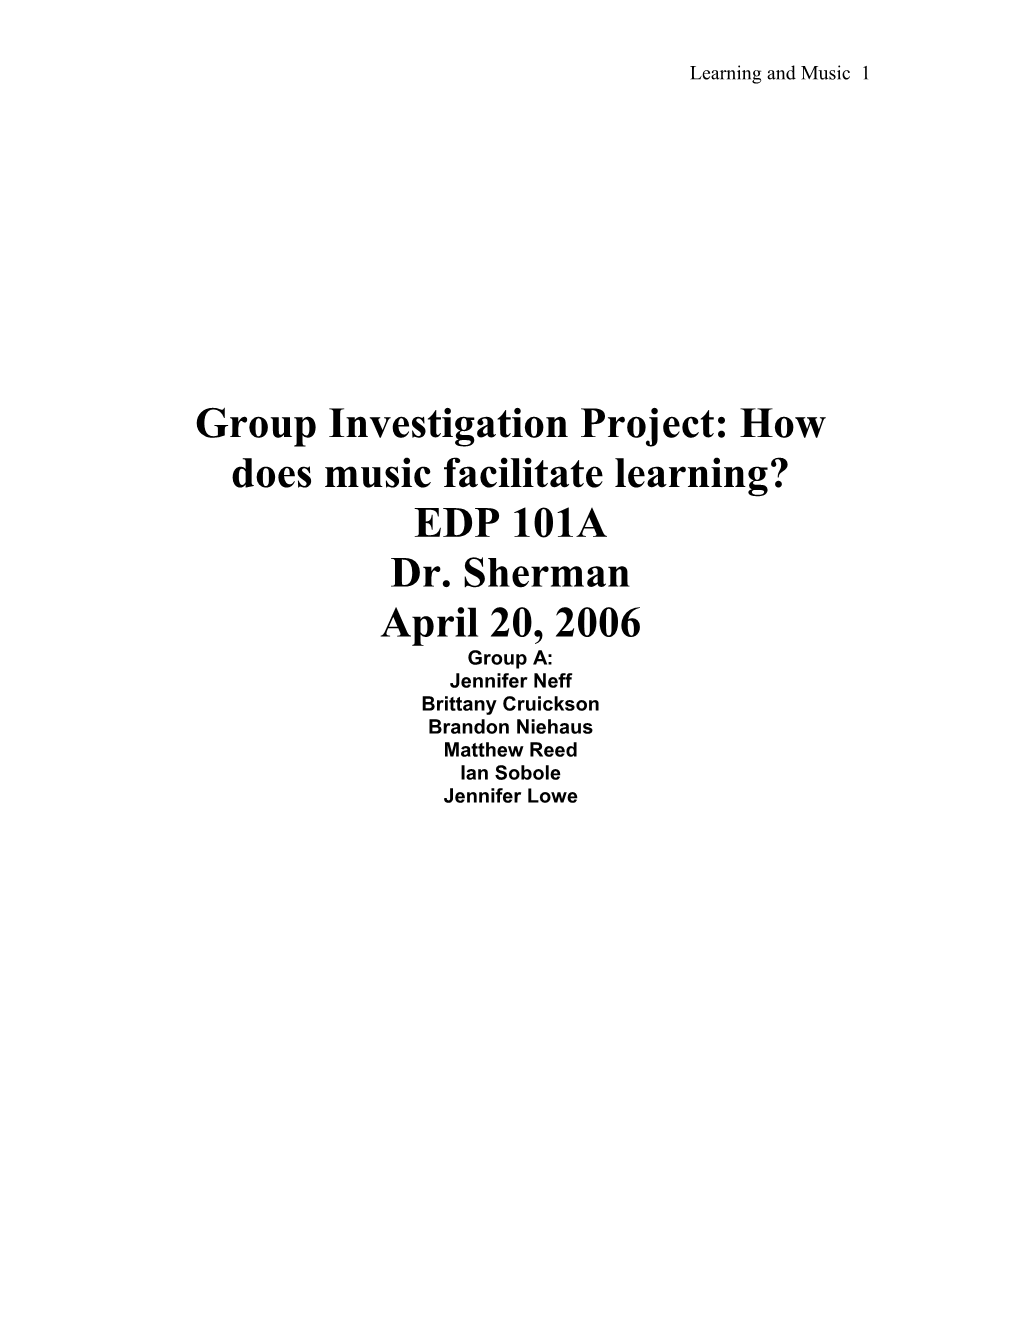 Group Investigation Project: How Does Music Facilitate Learning